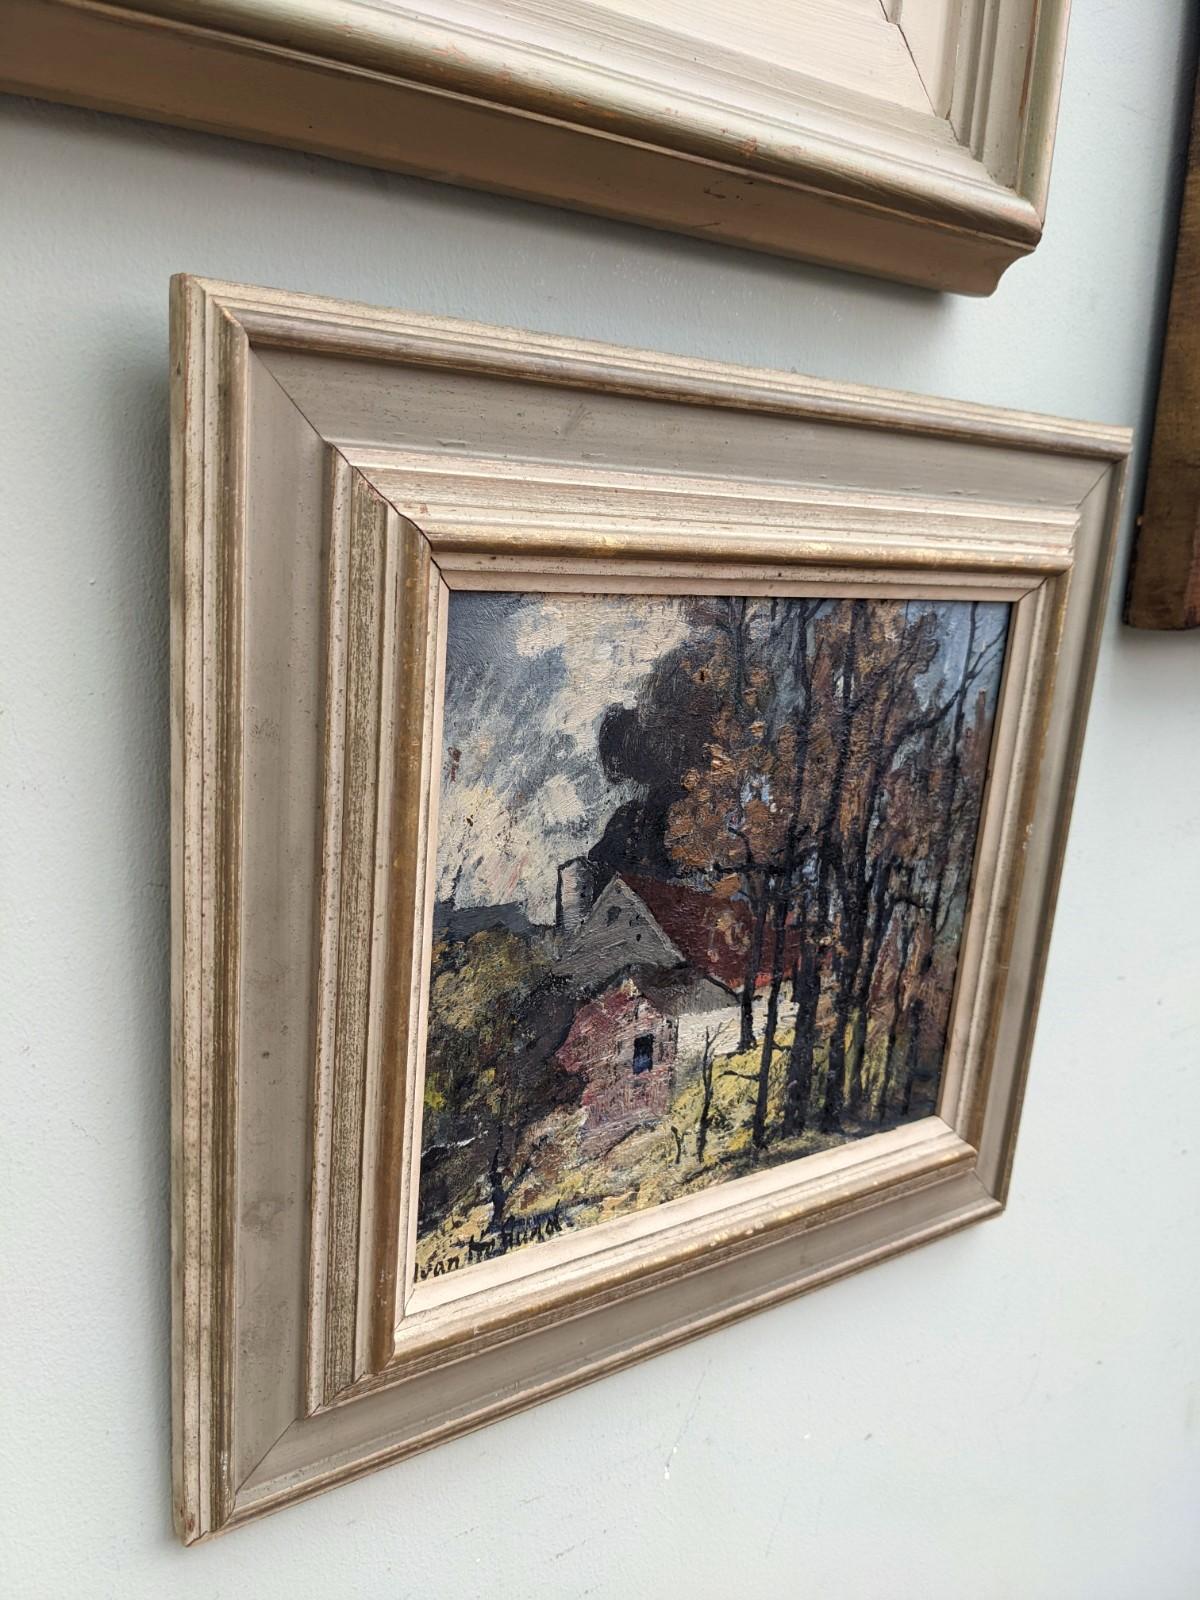 Cottage in the Forest
Size: 31.5 x 34.5 cm (including frame)
Oil on Board

A very pleasant mid century expressionist landscape composition, executed in oil onto board.

In this scenic view, a cottage nests in the middle of a lush forest surrounded